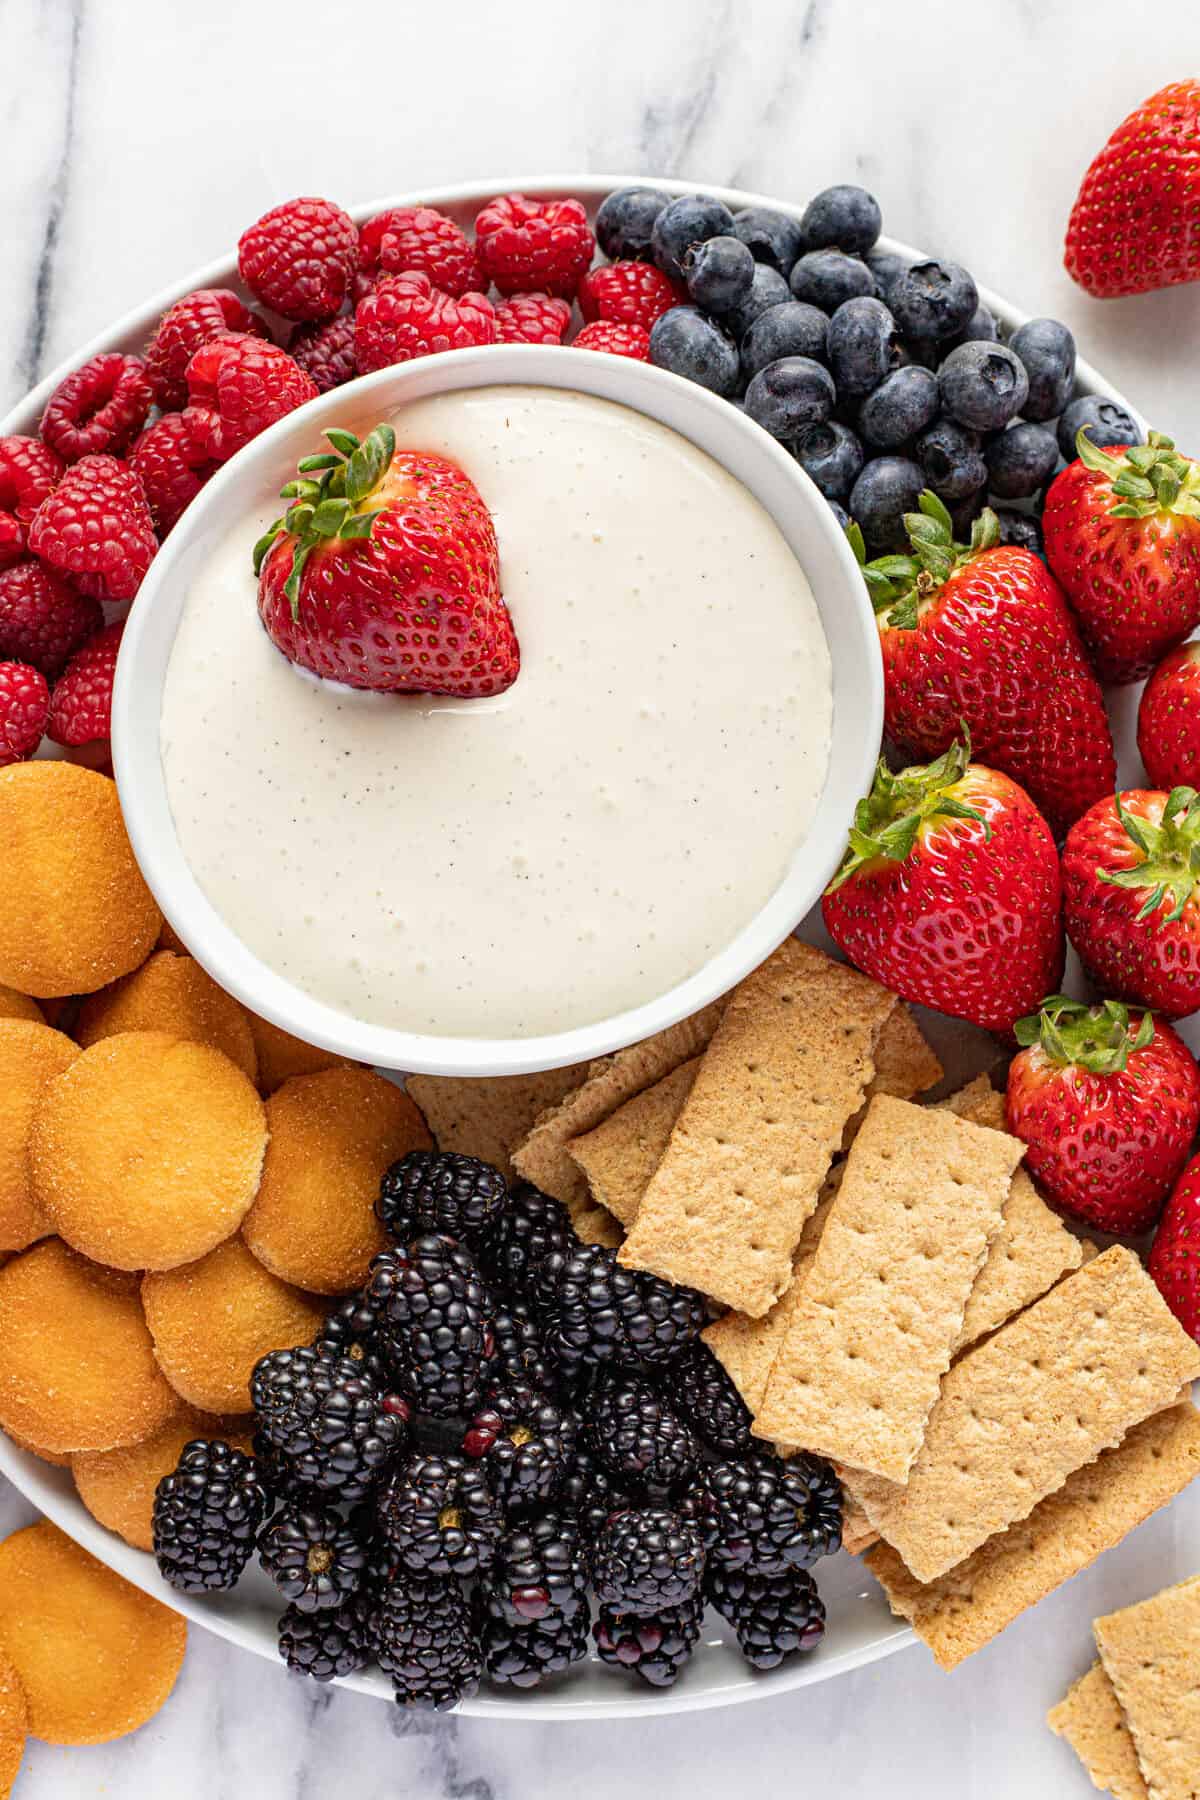 Platter of fruit, graham crackers, and Nilla wafers with a small bowl of fruit dip.